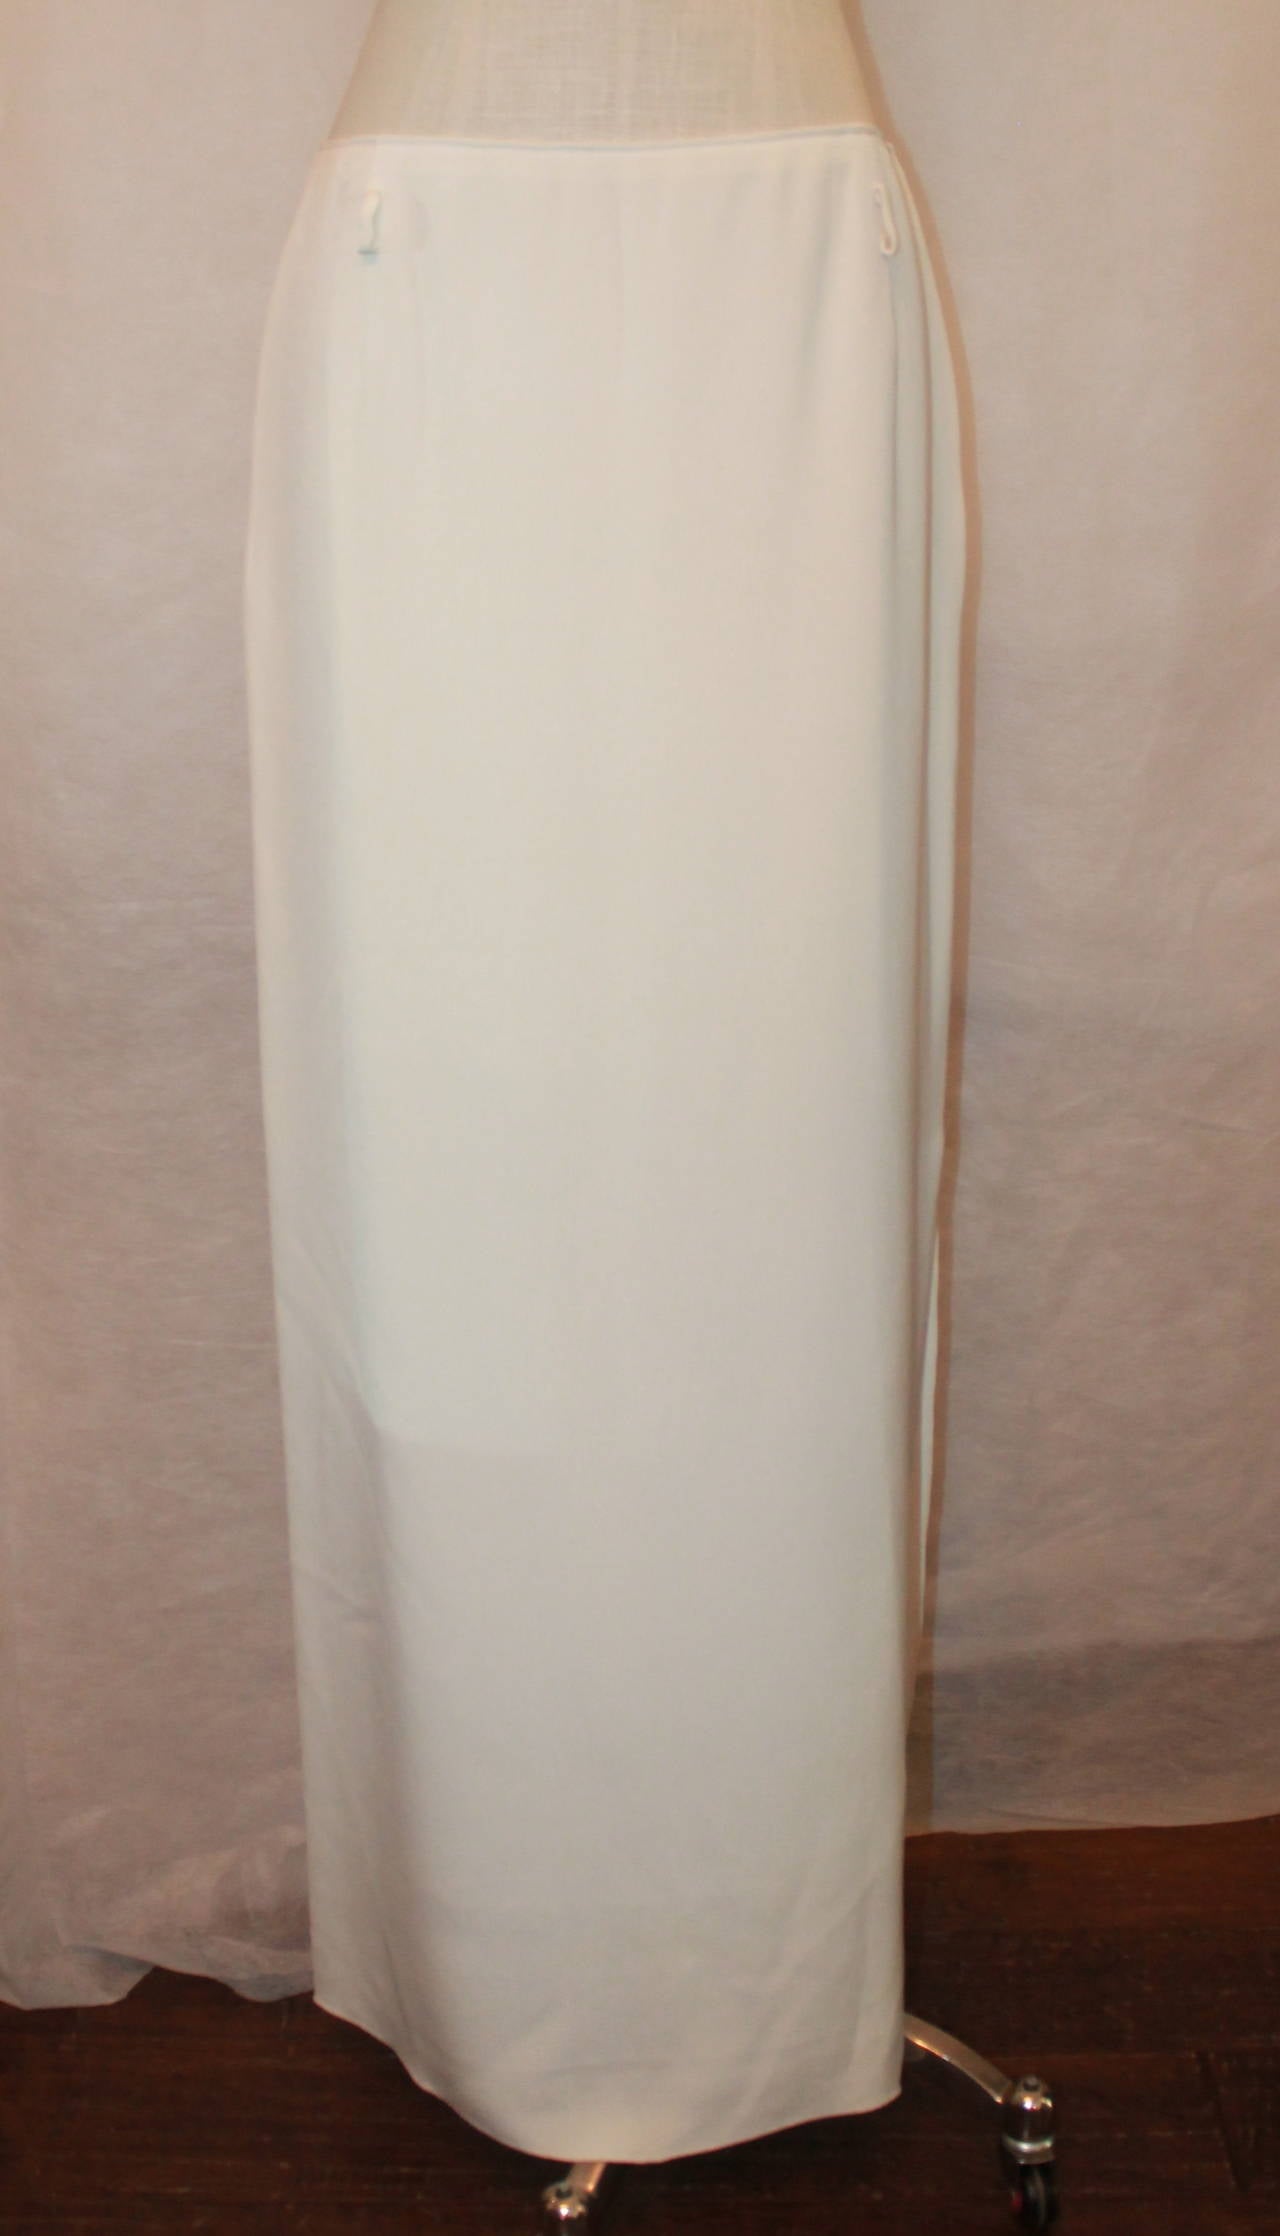 Oscar de la Renta 1990's Ivory Silk Long Skirt with Side Slit - 10. This skirt is in excellent condition and has holes at the waist for a thin belt. 

Measurements:
Waist- 31